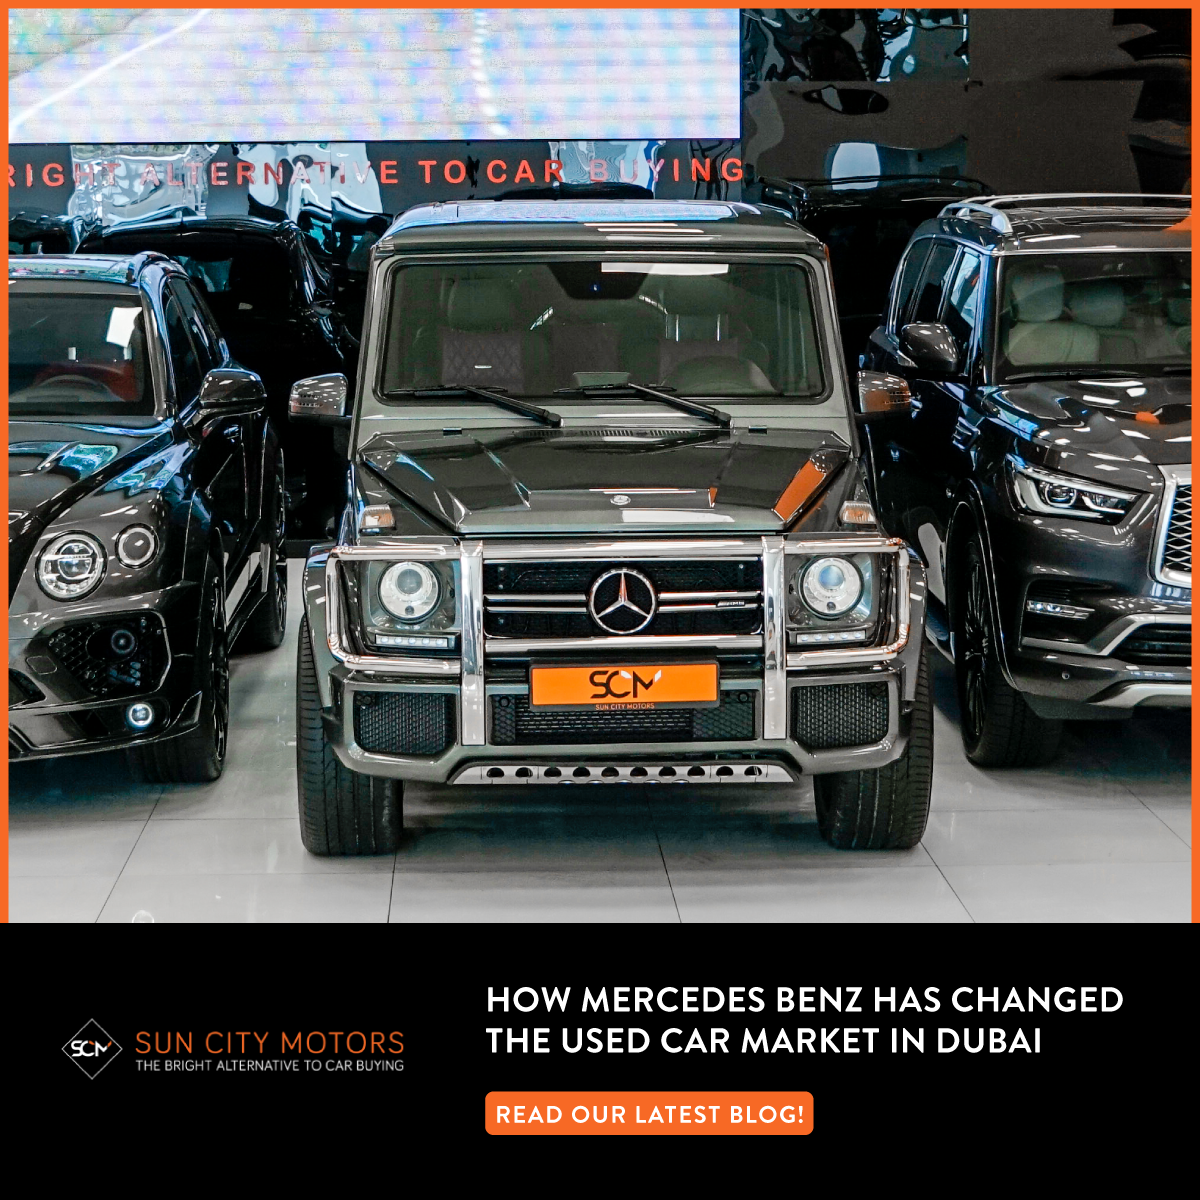 How Mercedes Benz Has Changed the Used Car Market in Dubai